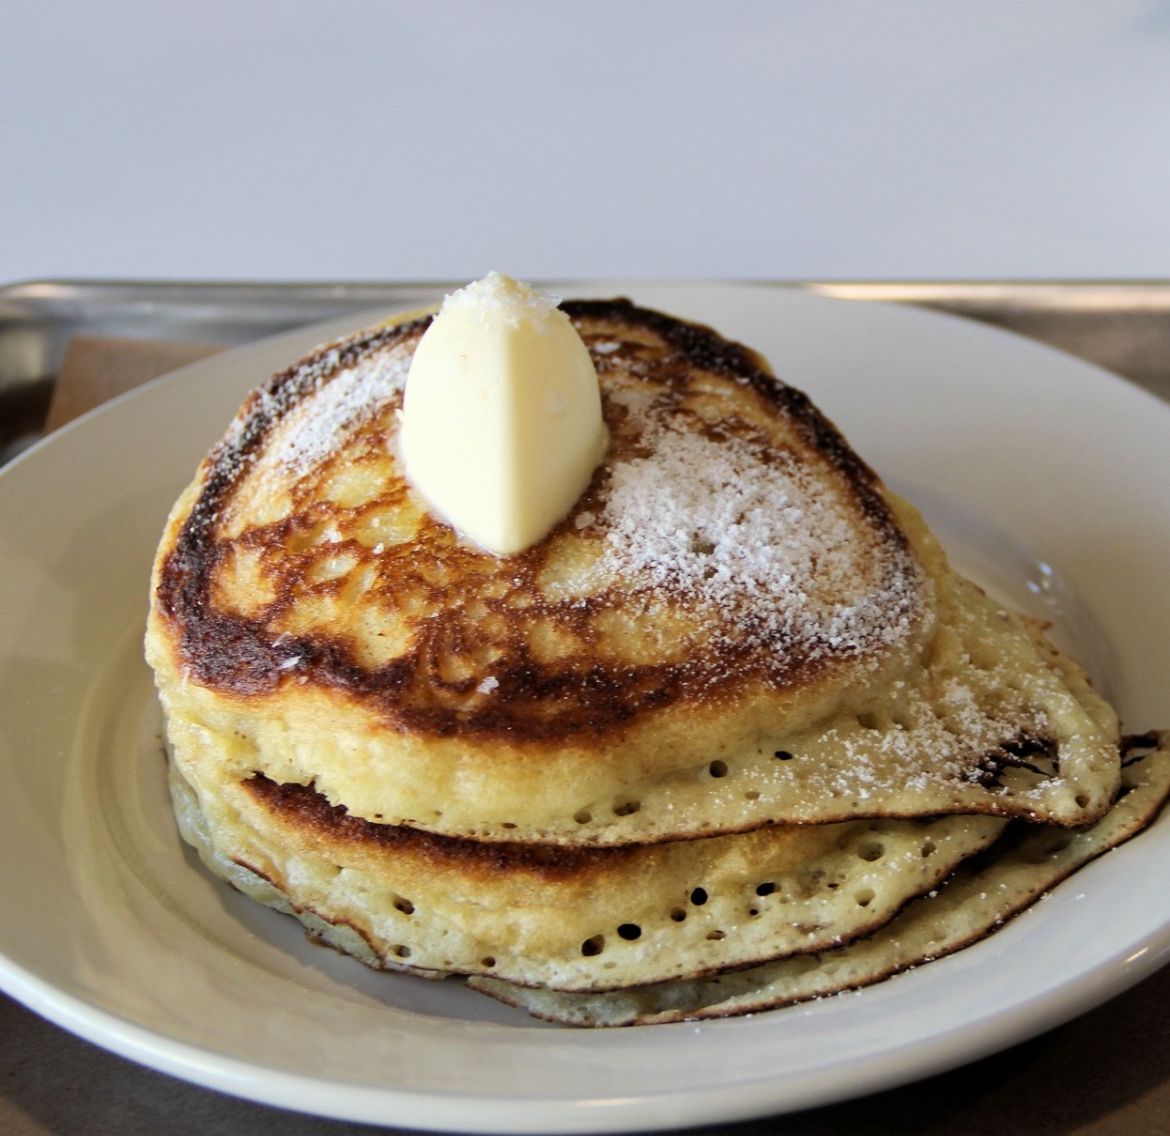 A stack of thick pancakes with a dallop of butter.